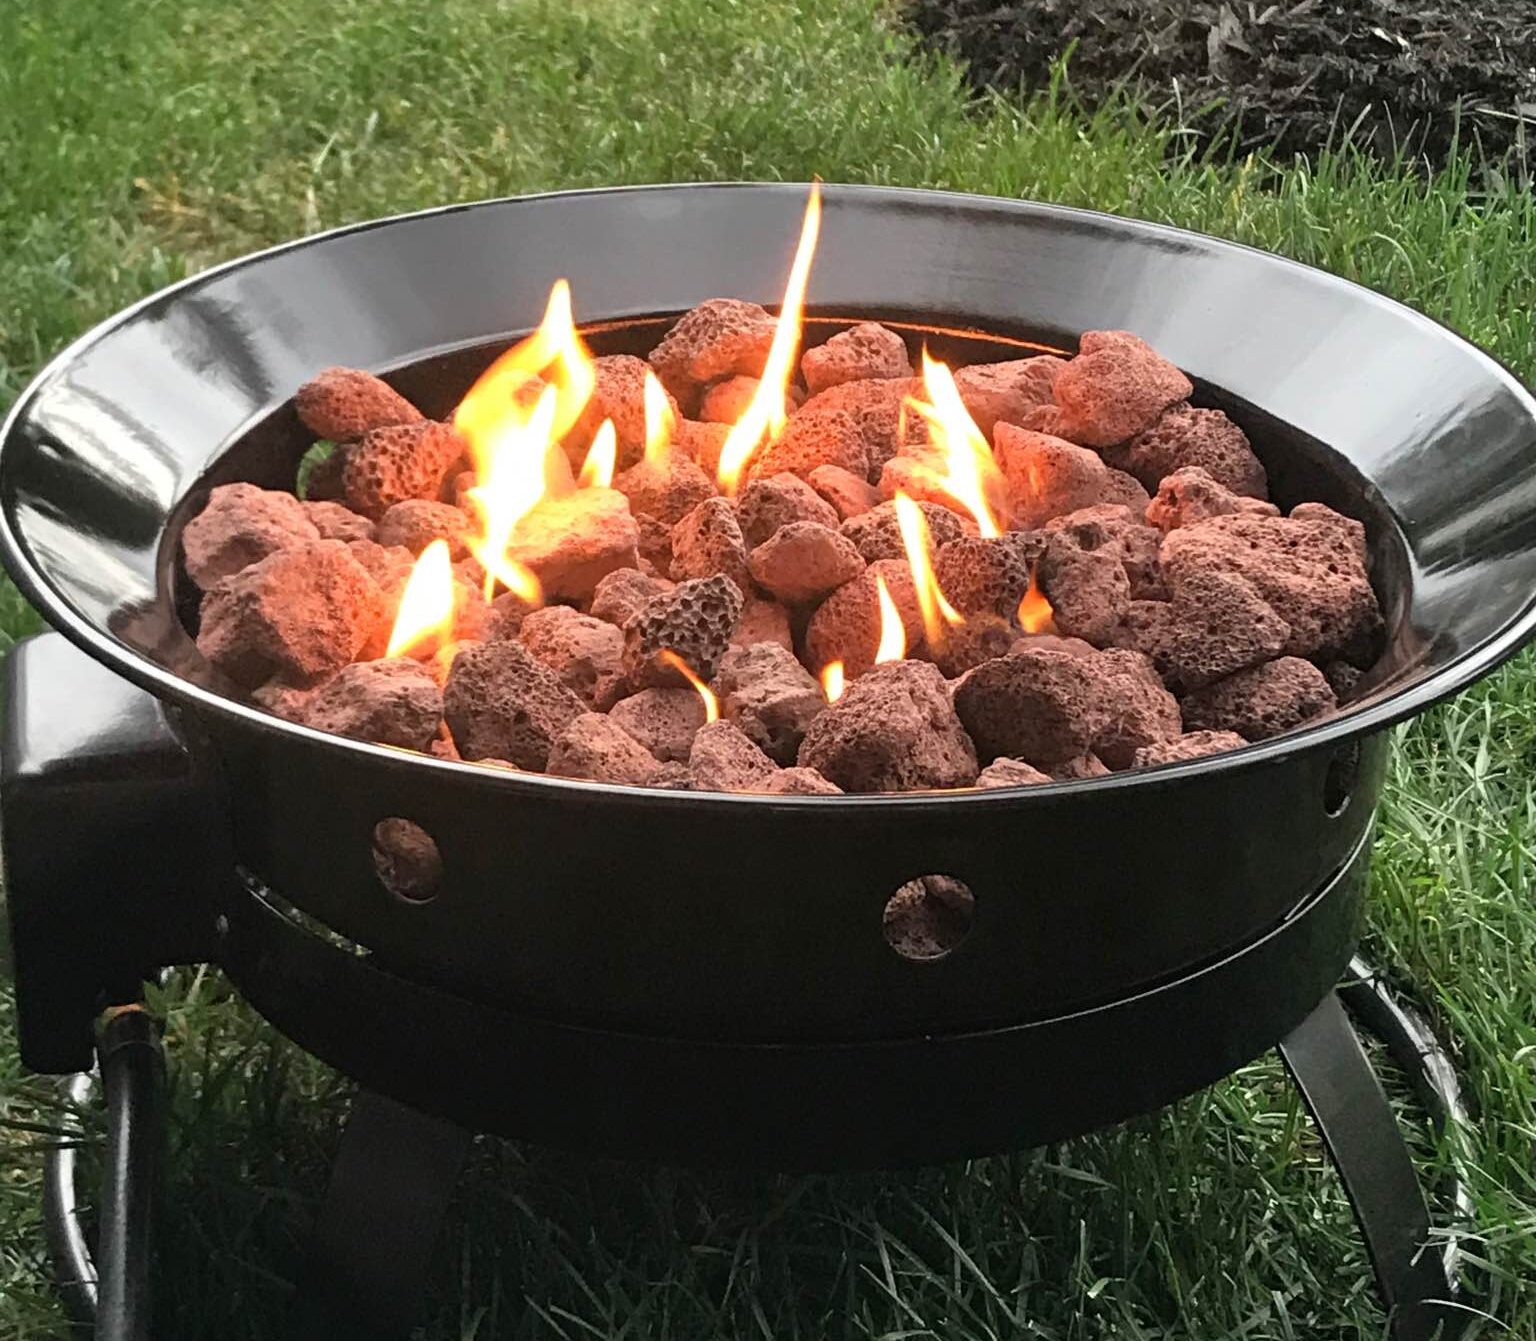 Portable Propane Fire Pits, Can You Use A Propane Fire Pit Inside